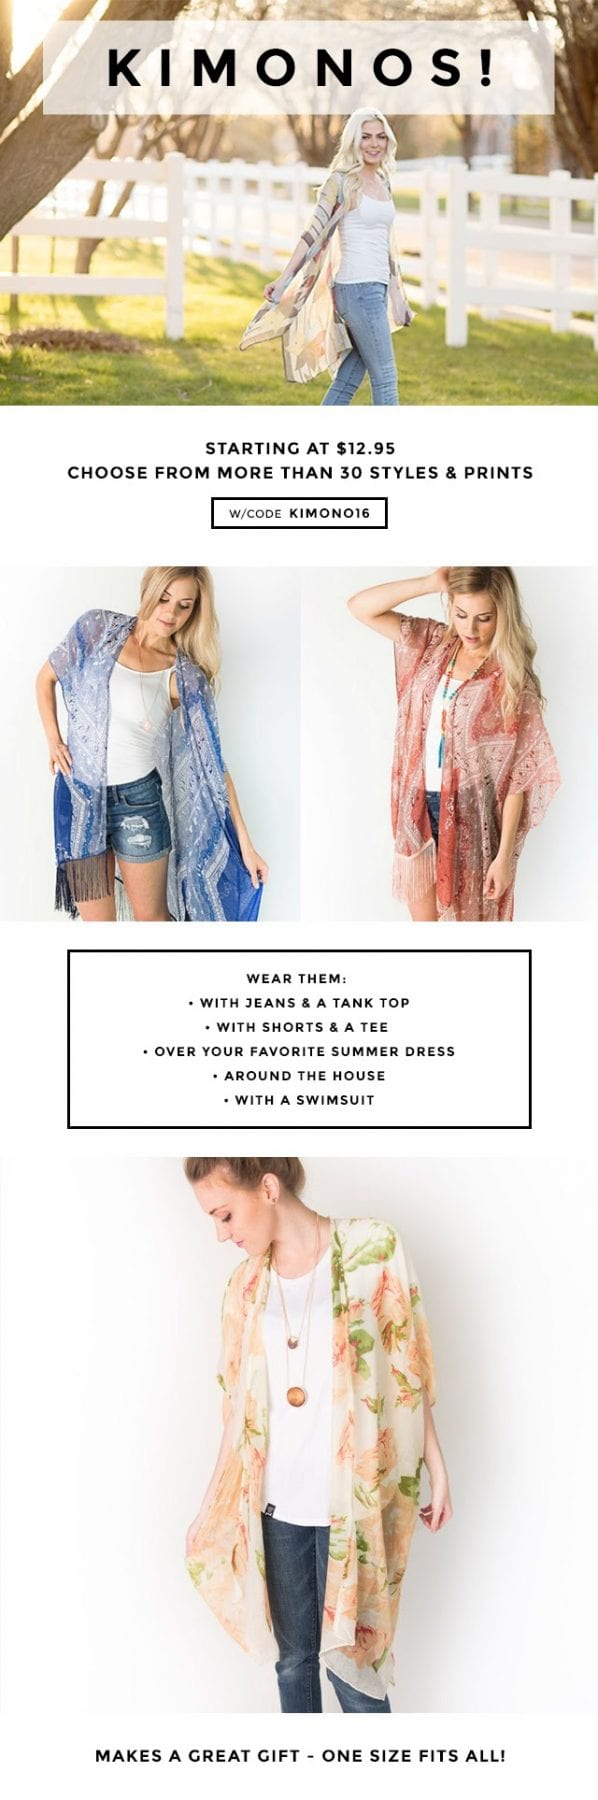 Kimono fashion - wear a kimono with jeans, over a swimsuit, over your favorite summer dress or with shorts and a tee. The style possibilities are endless!